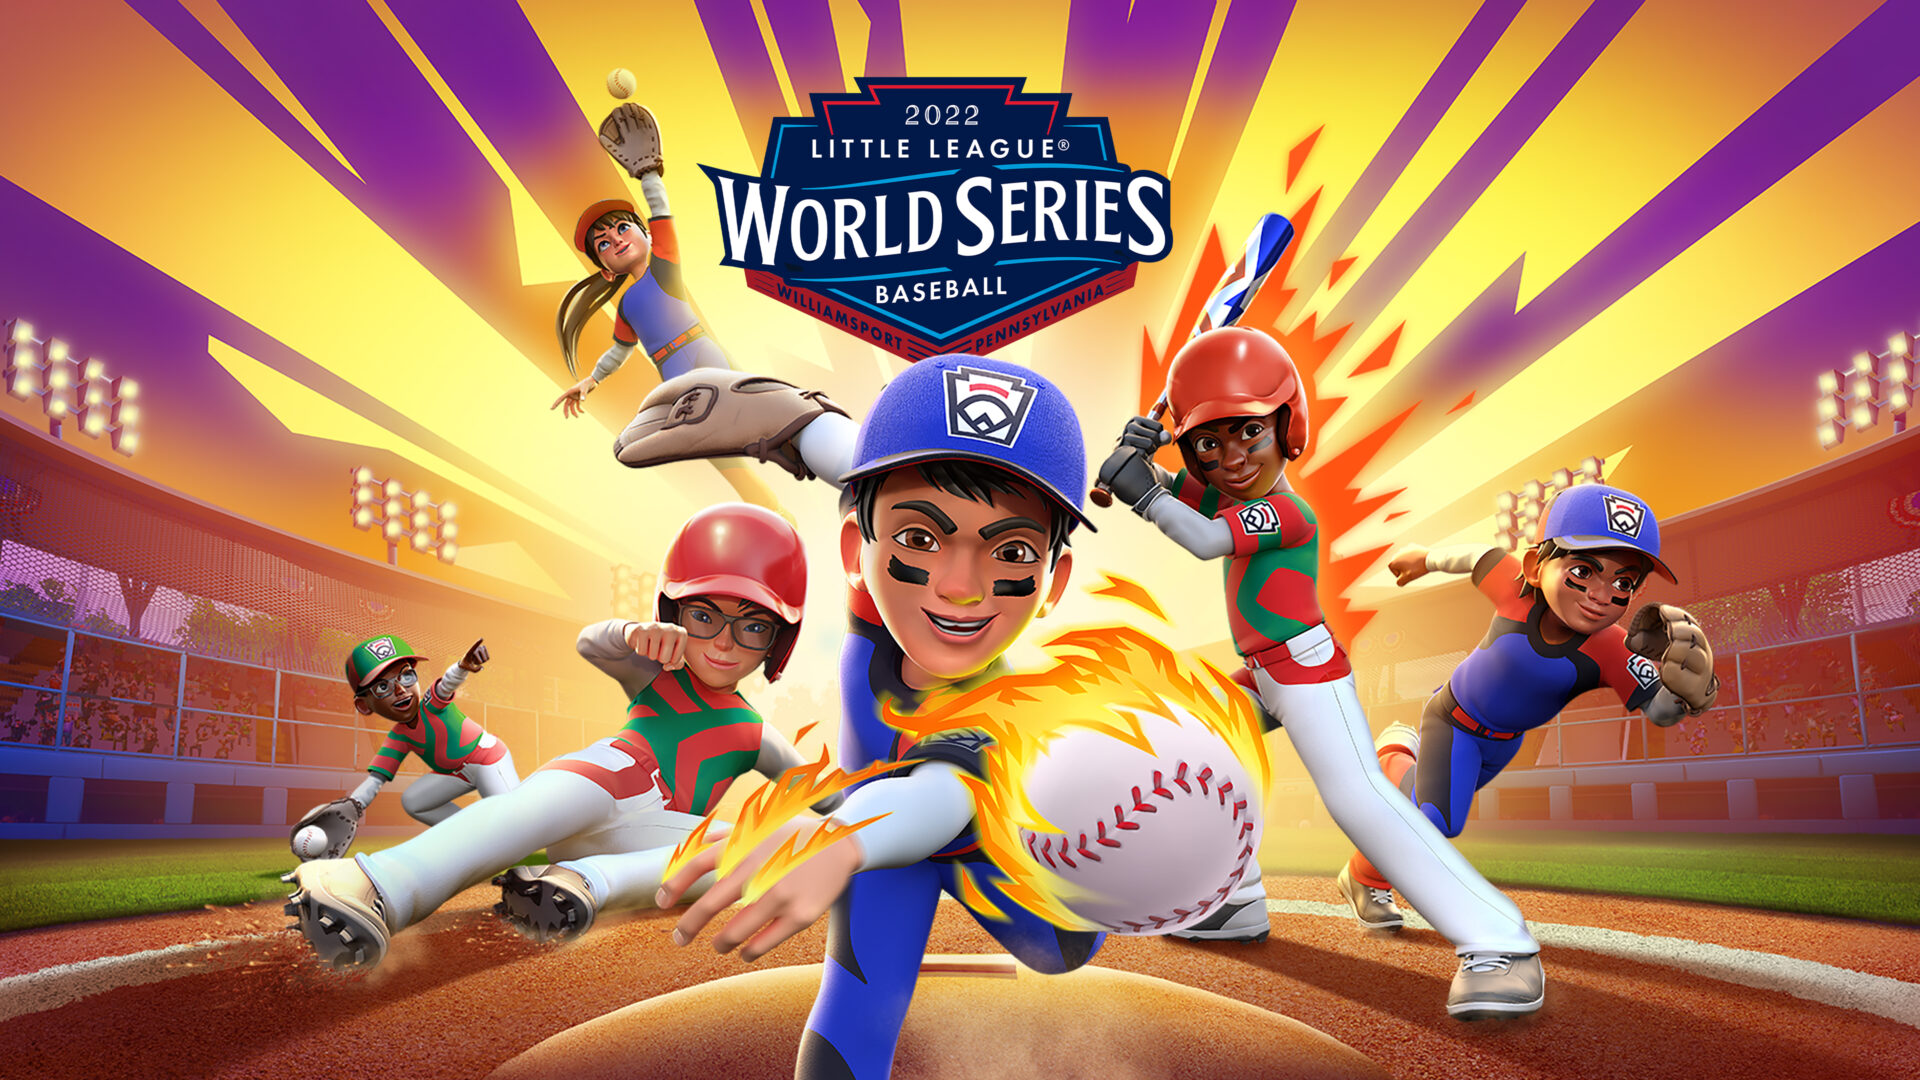 Little League World Series Baseball 2022 Announced - Features Revealed